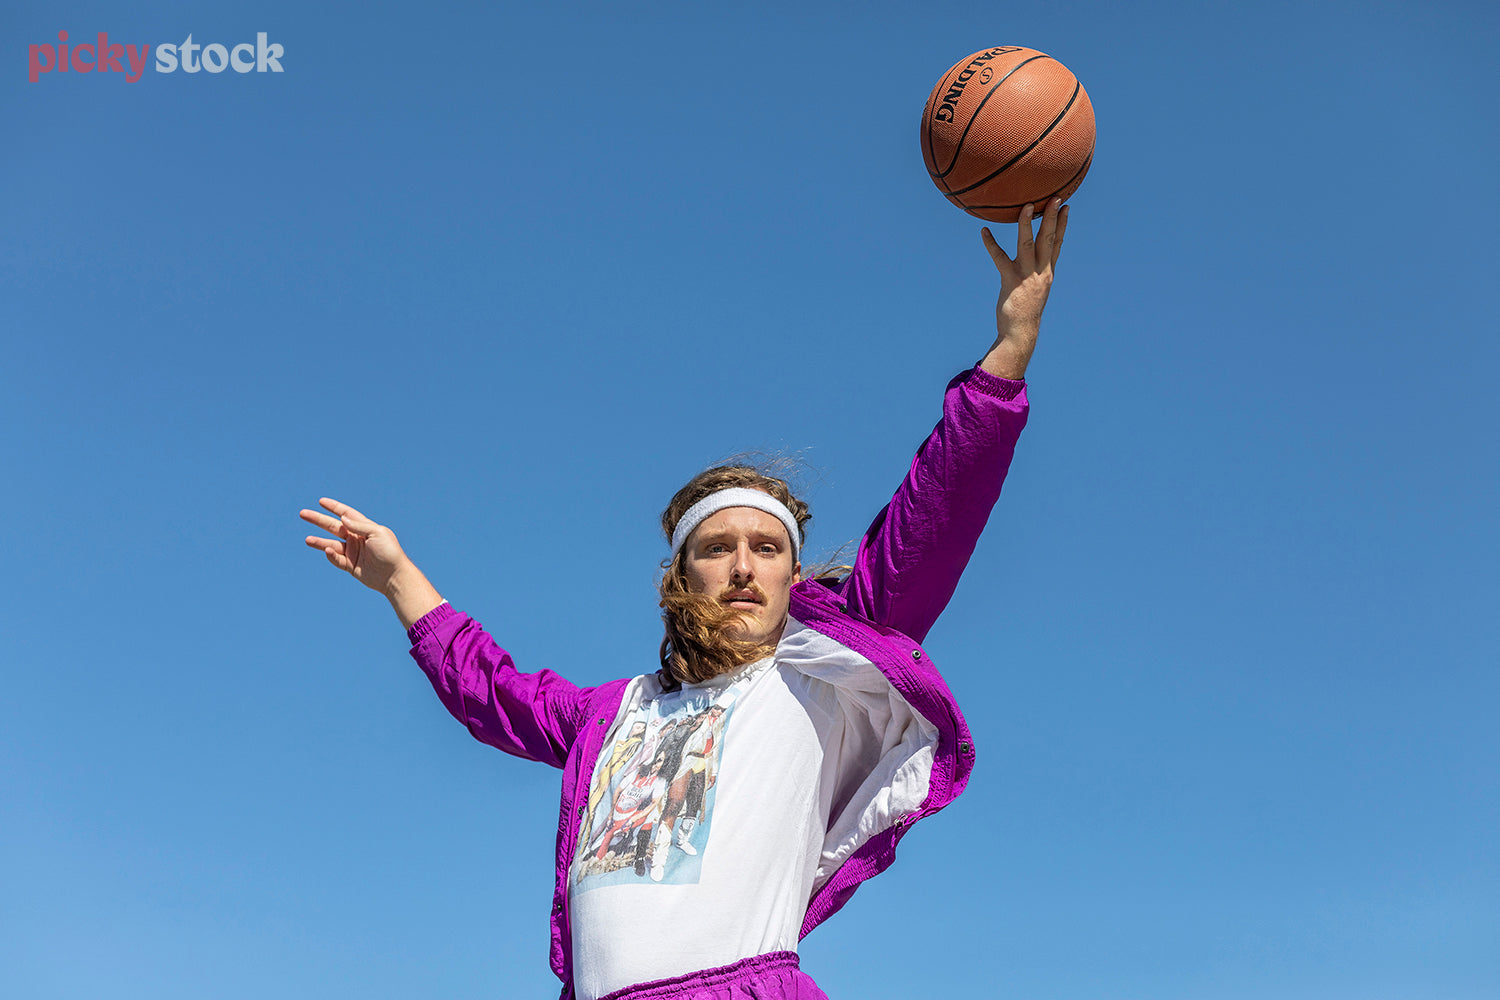 Man jumps in to frame wearing a bright purple eighties style jumpsuit, and sweatband.